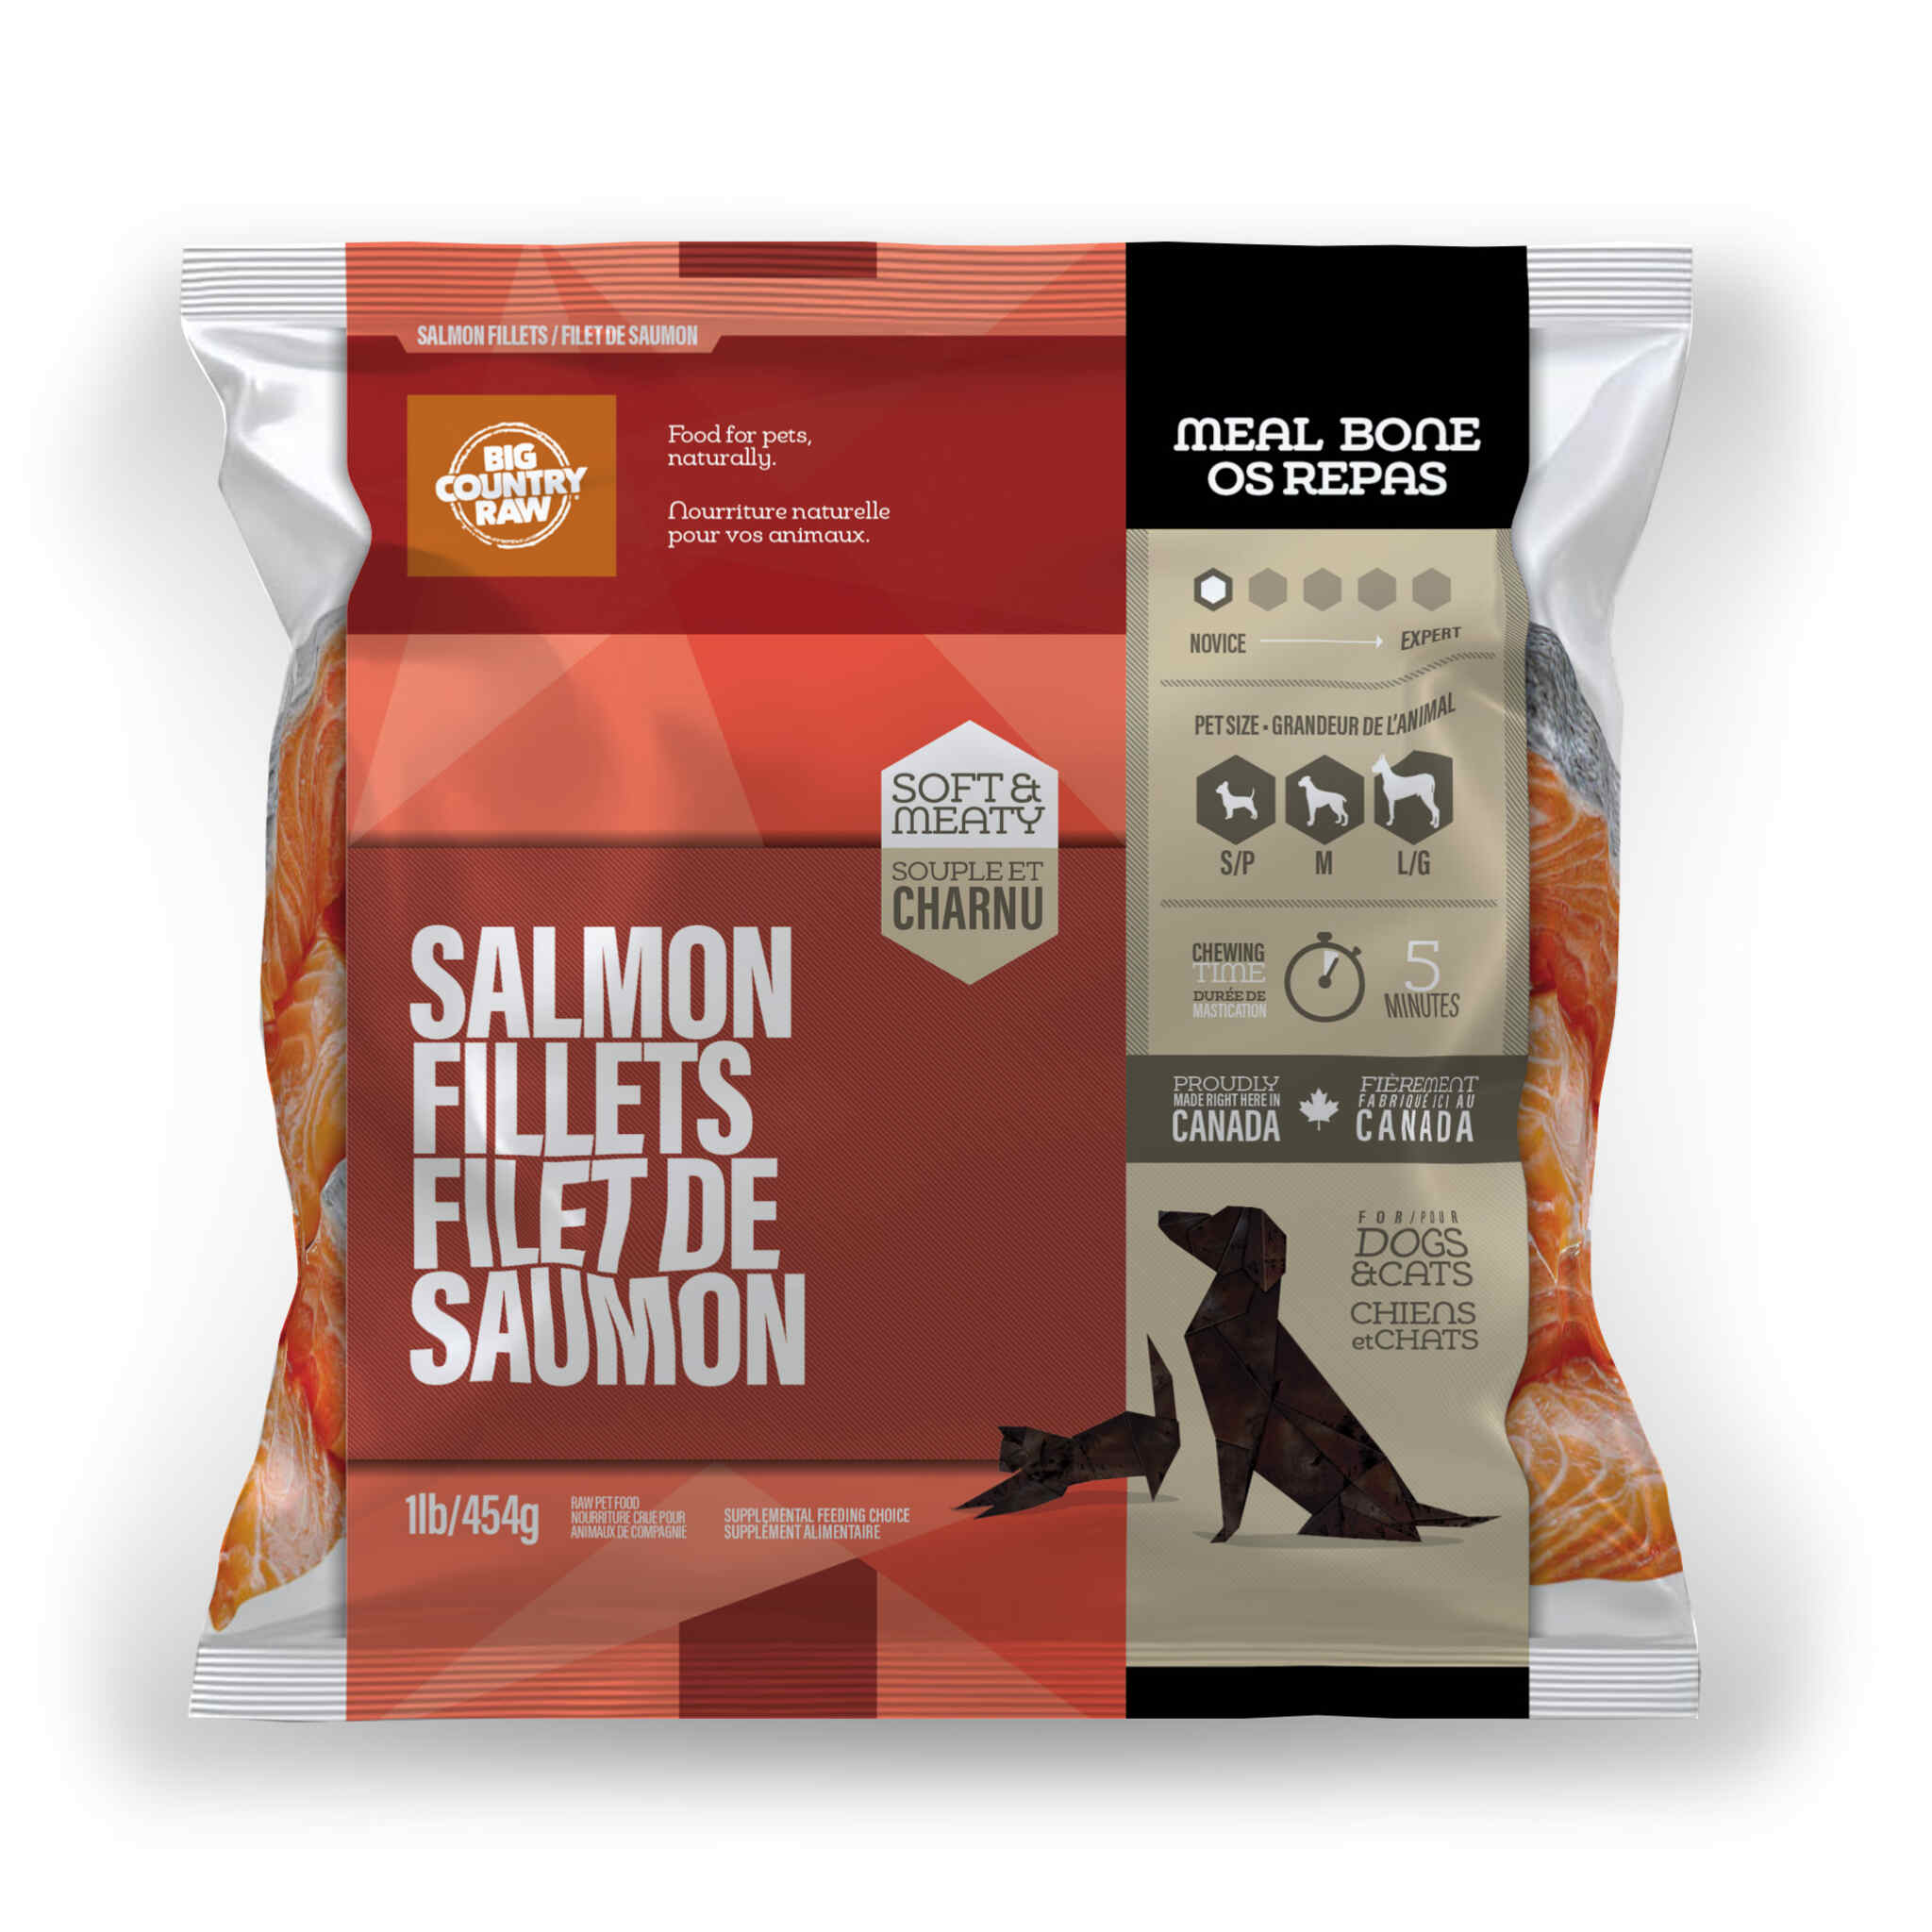 A bag of Big Country Raw Salmon Fillets, Cat or Dog treat, 1 lb, roughly 5 minutes chewing time, requires freezing.